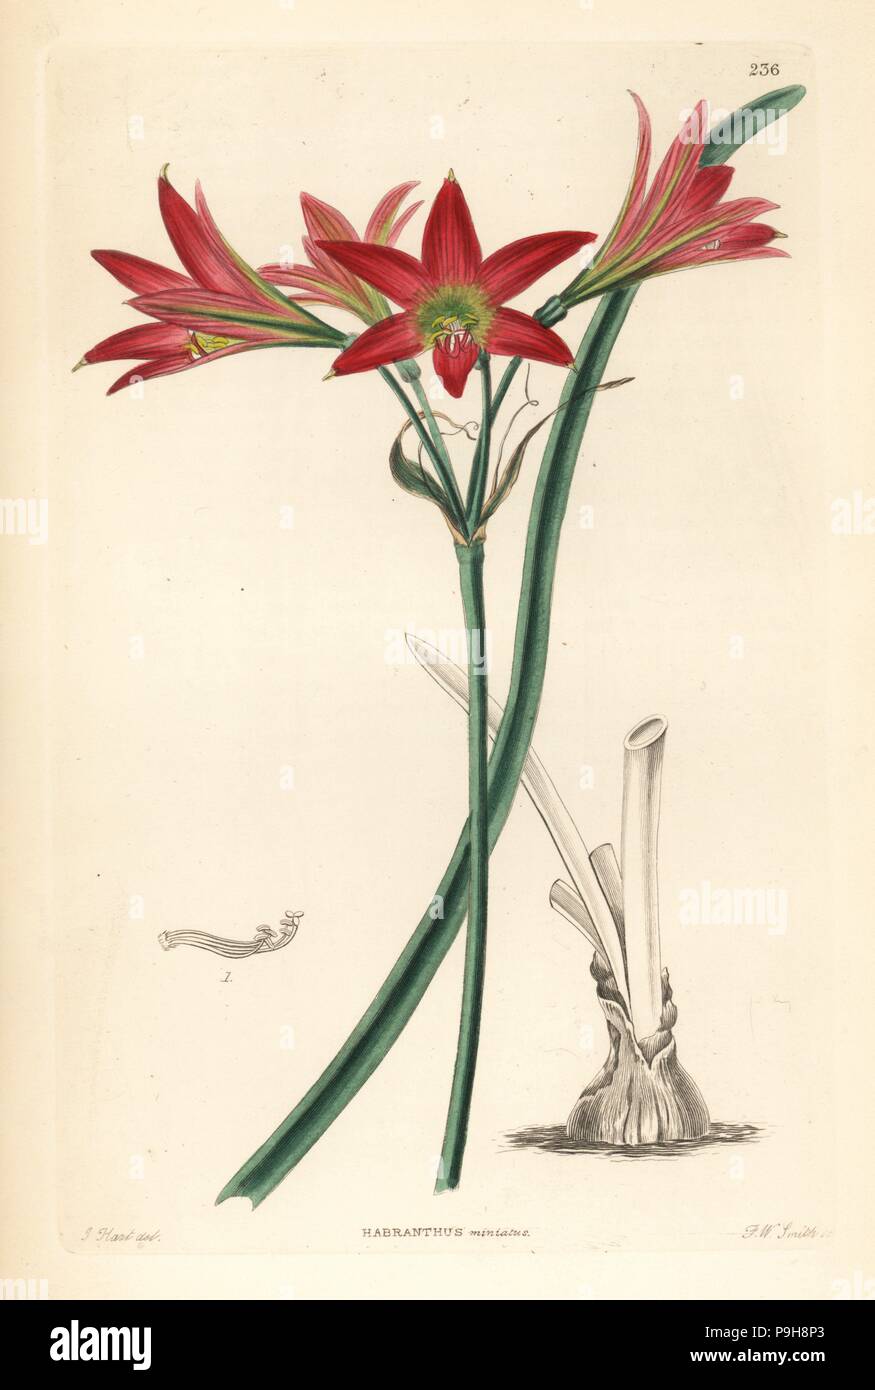 Rhodophiala advena (Red habranth, Habranthus miniatus). Handcoloured copperplate engraving by Frederick W. Smith after J. Hart from John Lindley and Robert Sweet's Ornamental Flower Garden and Shrubbery, G. Willis, London, 1854. Stock Photo